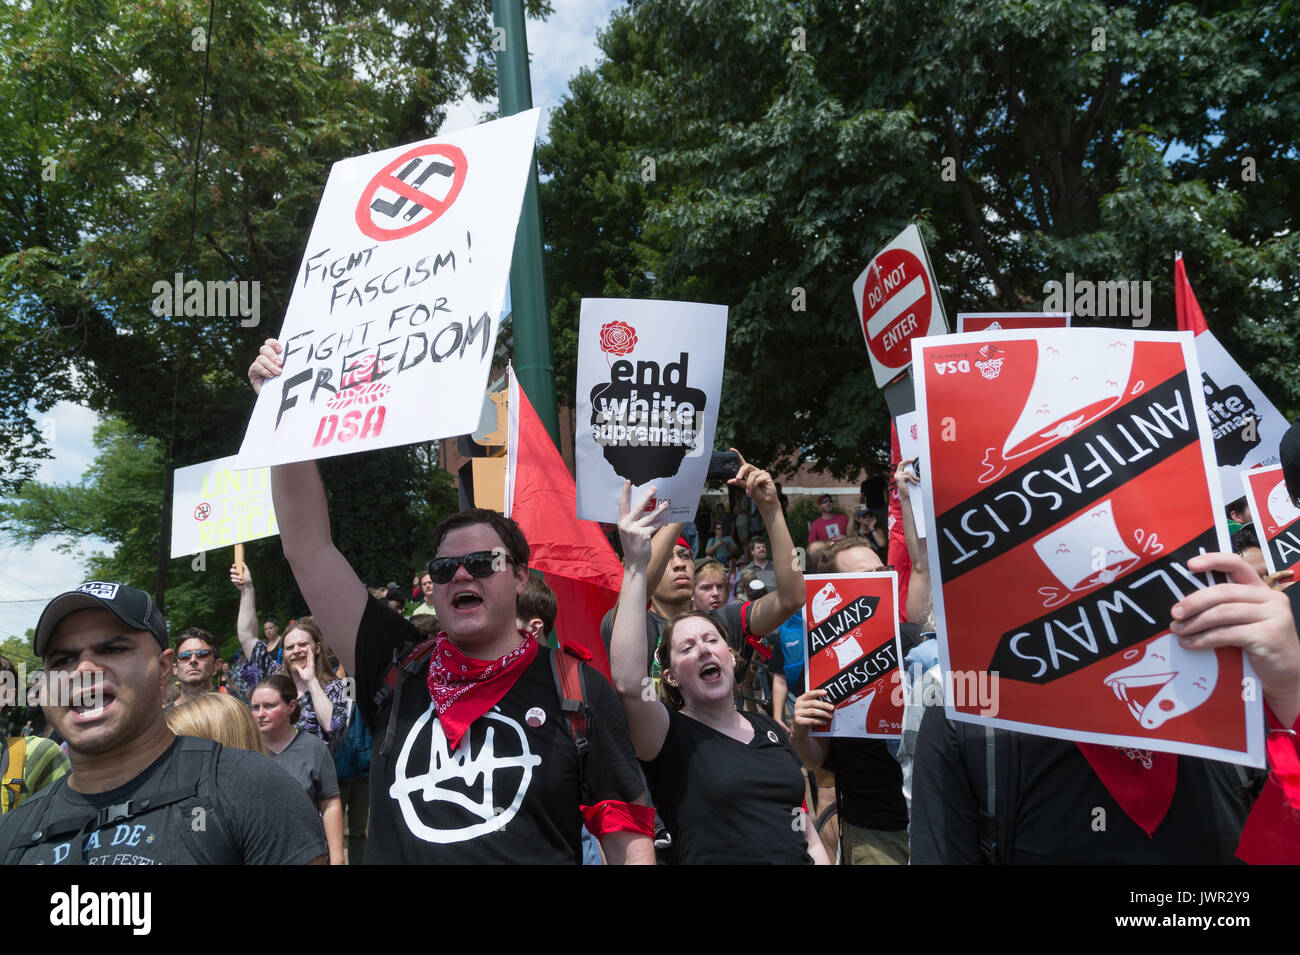 Charlottesville, United States. 12th Aug, 2017. Neo-Nazis, white supremacists and other alt-right factions scuffled with counter-demonstrators near Emancipation Park (Formerly 'Lee Park') in downtown Charlottesville, Virginia. After fighting between factions escalated, Virginia State Police ordered the evacuation by all parties and cancellation of the 'Unite The Right' rally scheduled to take place in the park. Credit: Albin Lohr-Jones/Pacific Press/Alamy Live News Stock Photo